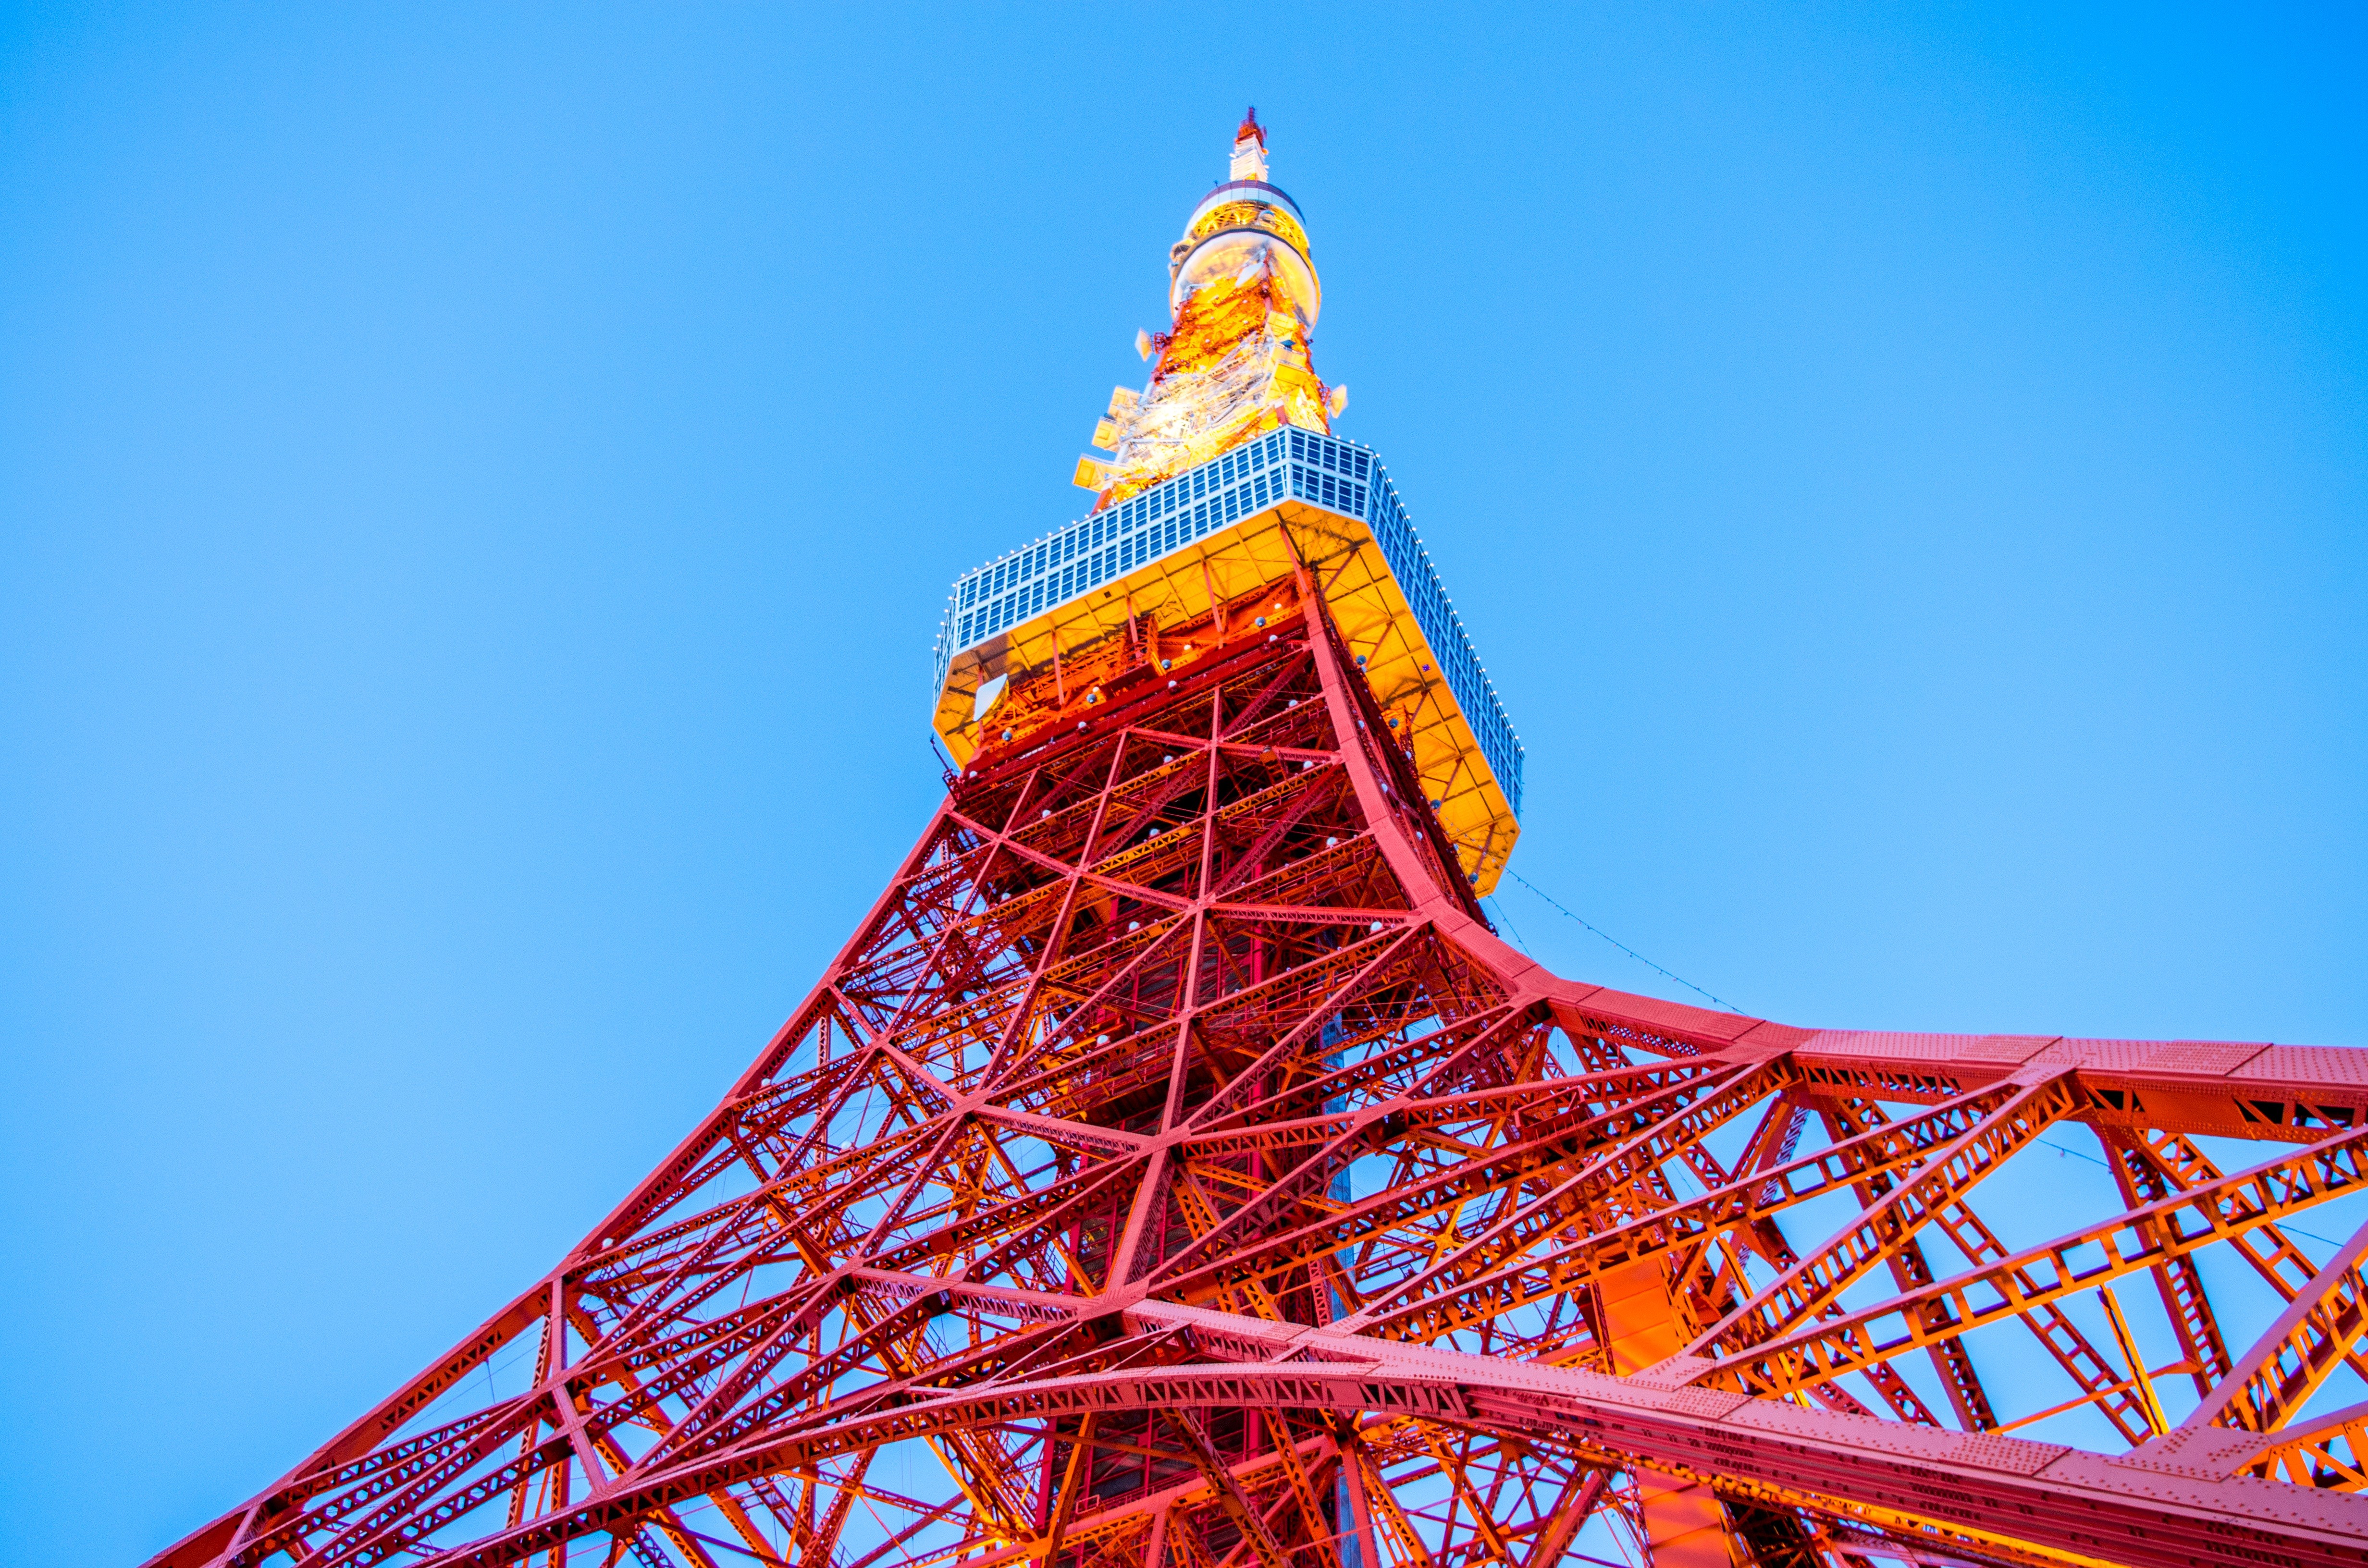 General 4928x3264 Japan Tokyo Tower worm's eye view sky architecture Tokyo red low-angle Asia landmark